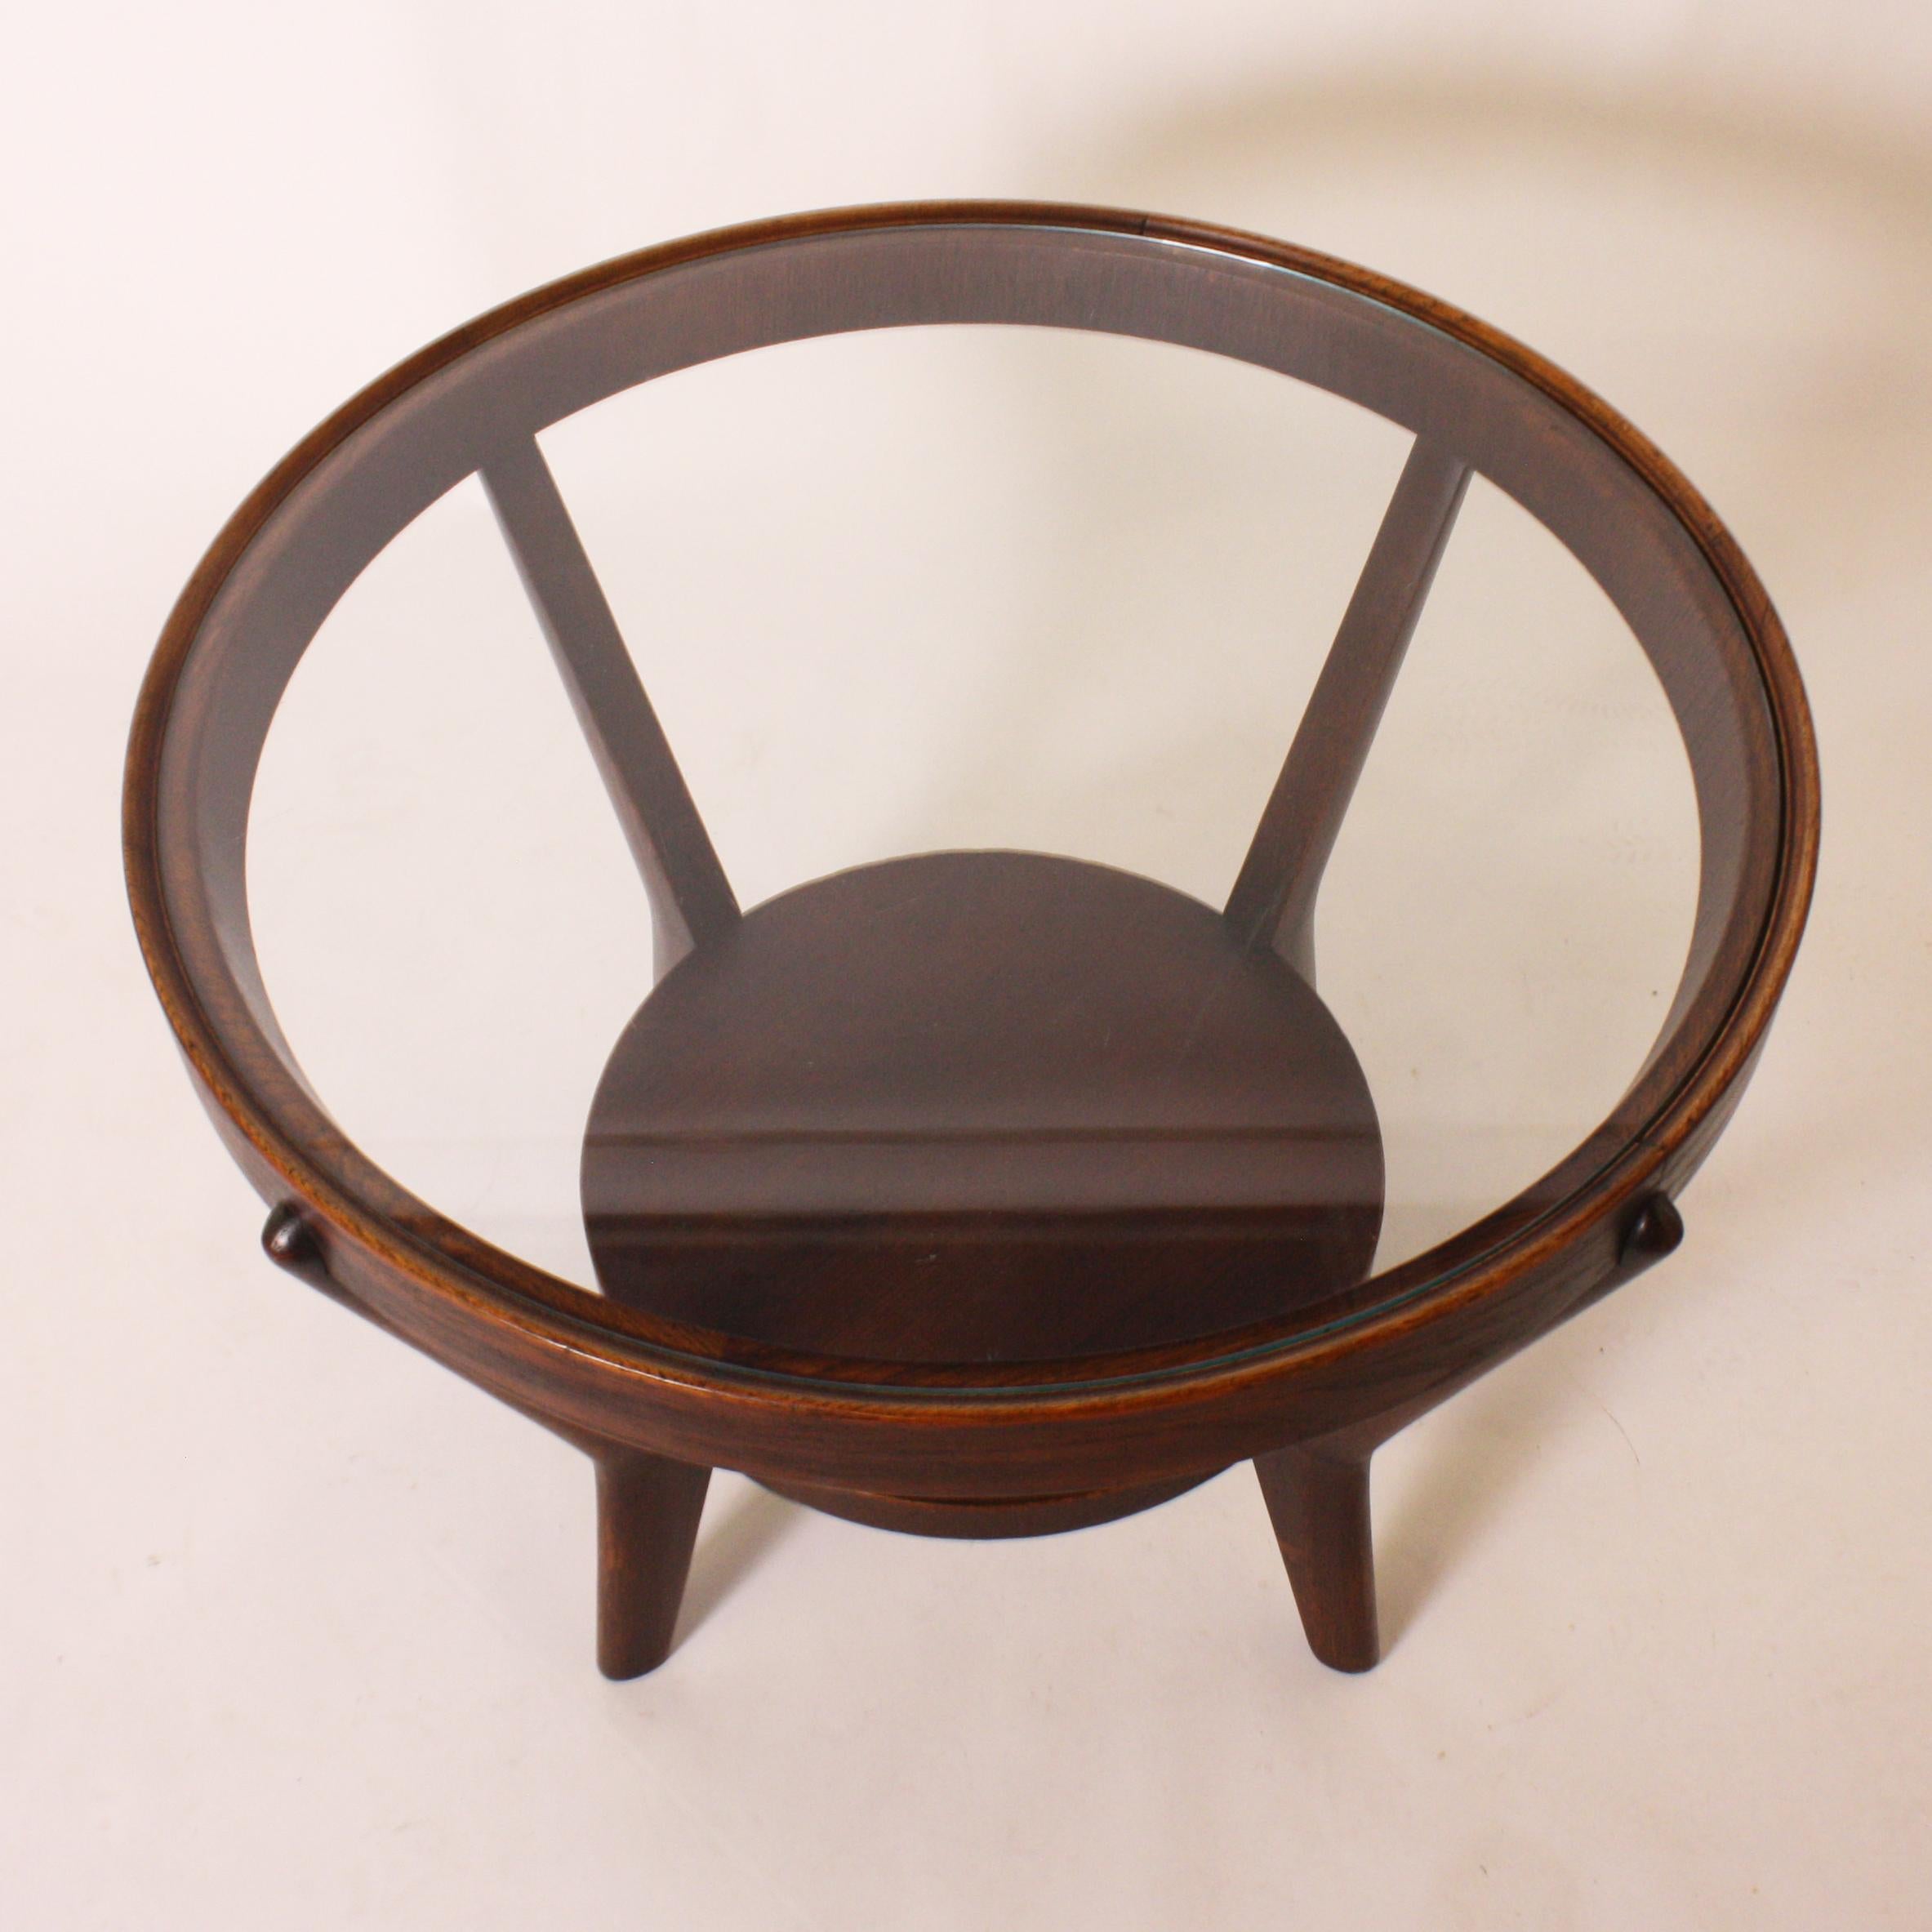 Mid-20th Century Round Mahogany Table with Glass Top, circa 1950